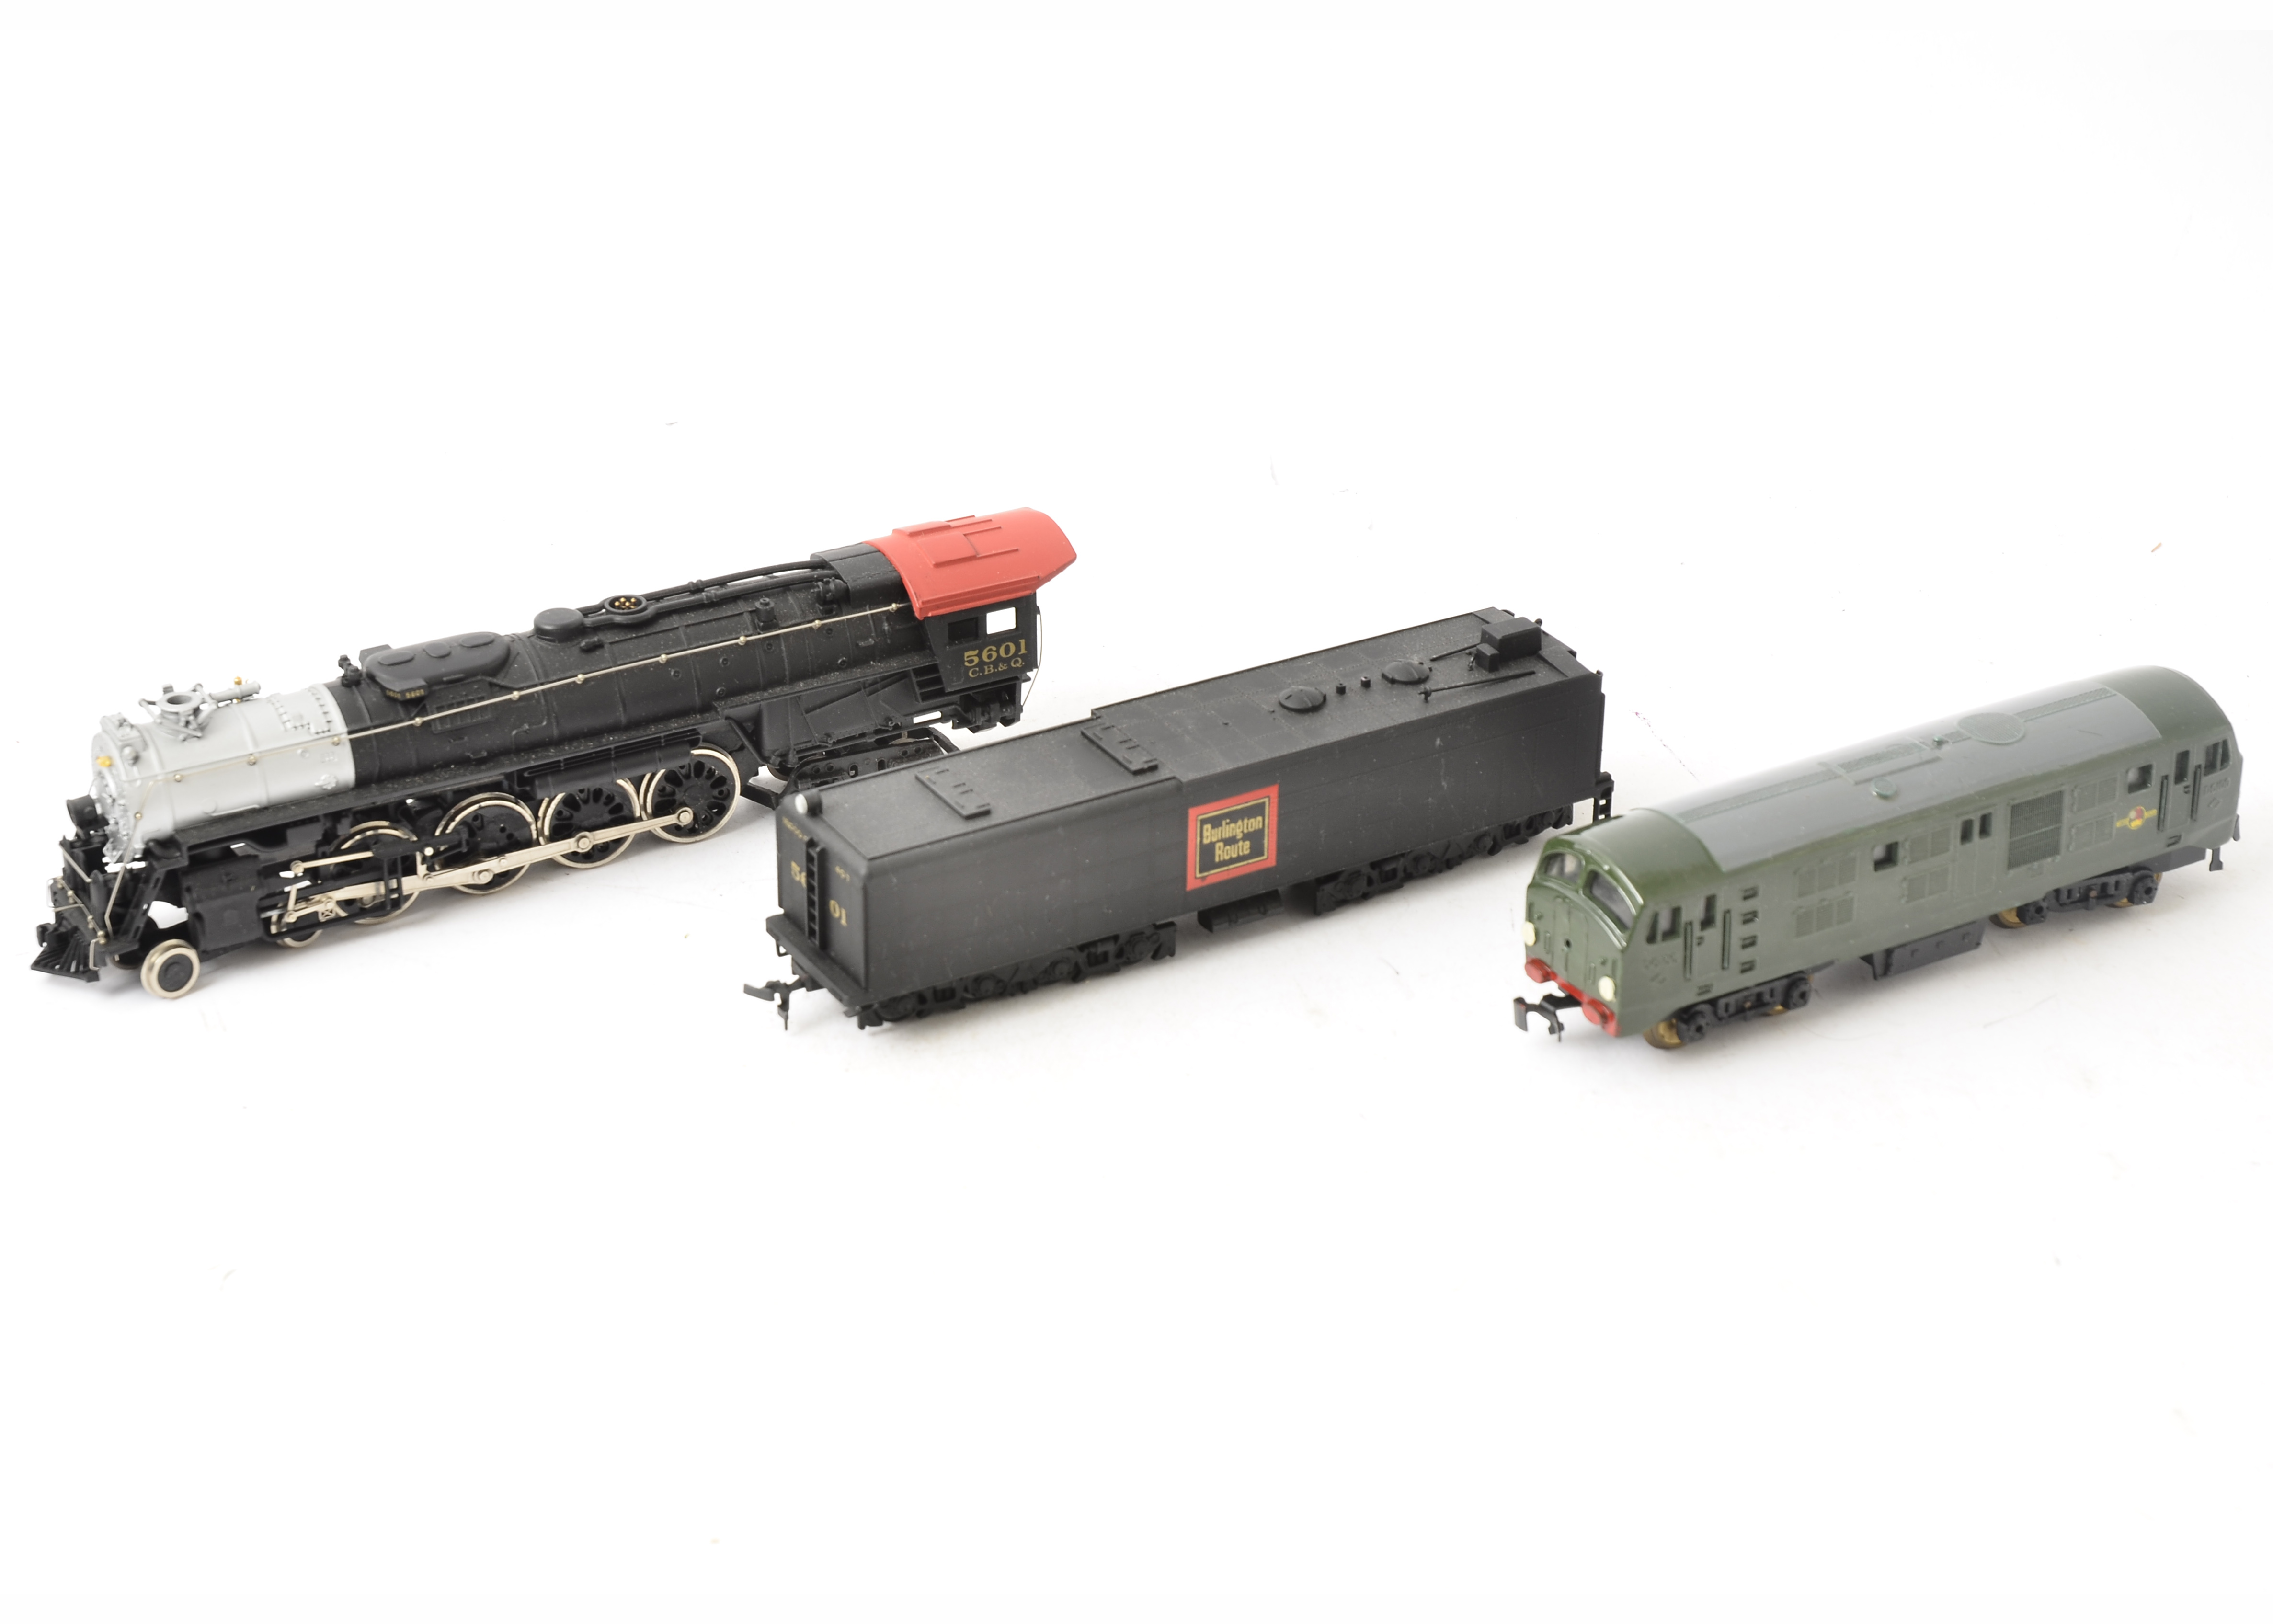 An Unboxed Bachmann American H0 Gauge CB&Q 4-8-4 Locomotive and Tender, in 'Burlington Route'